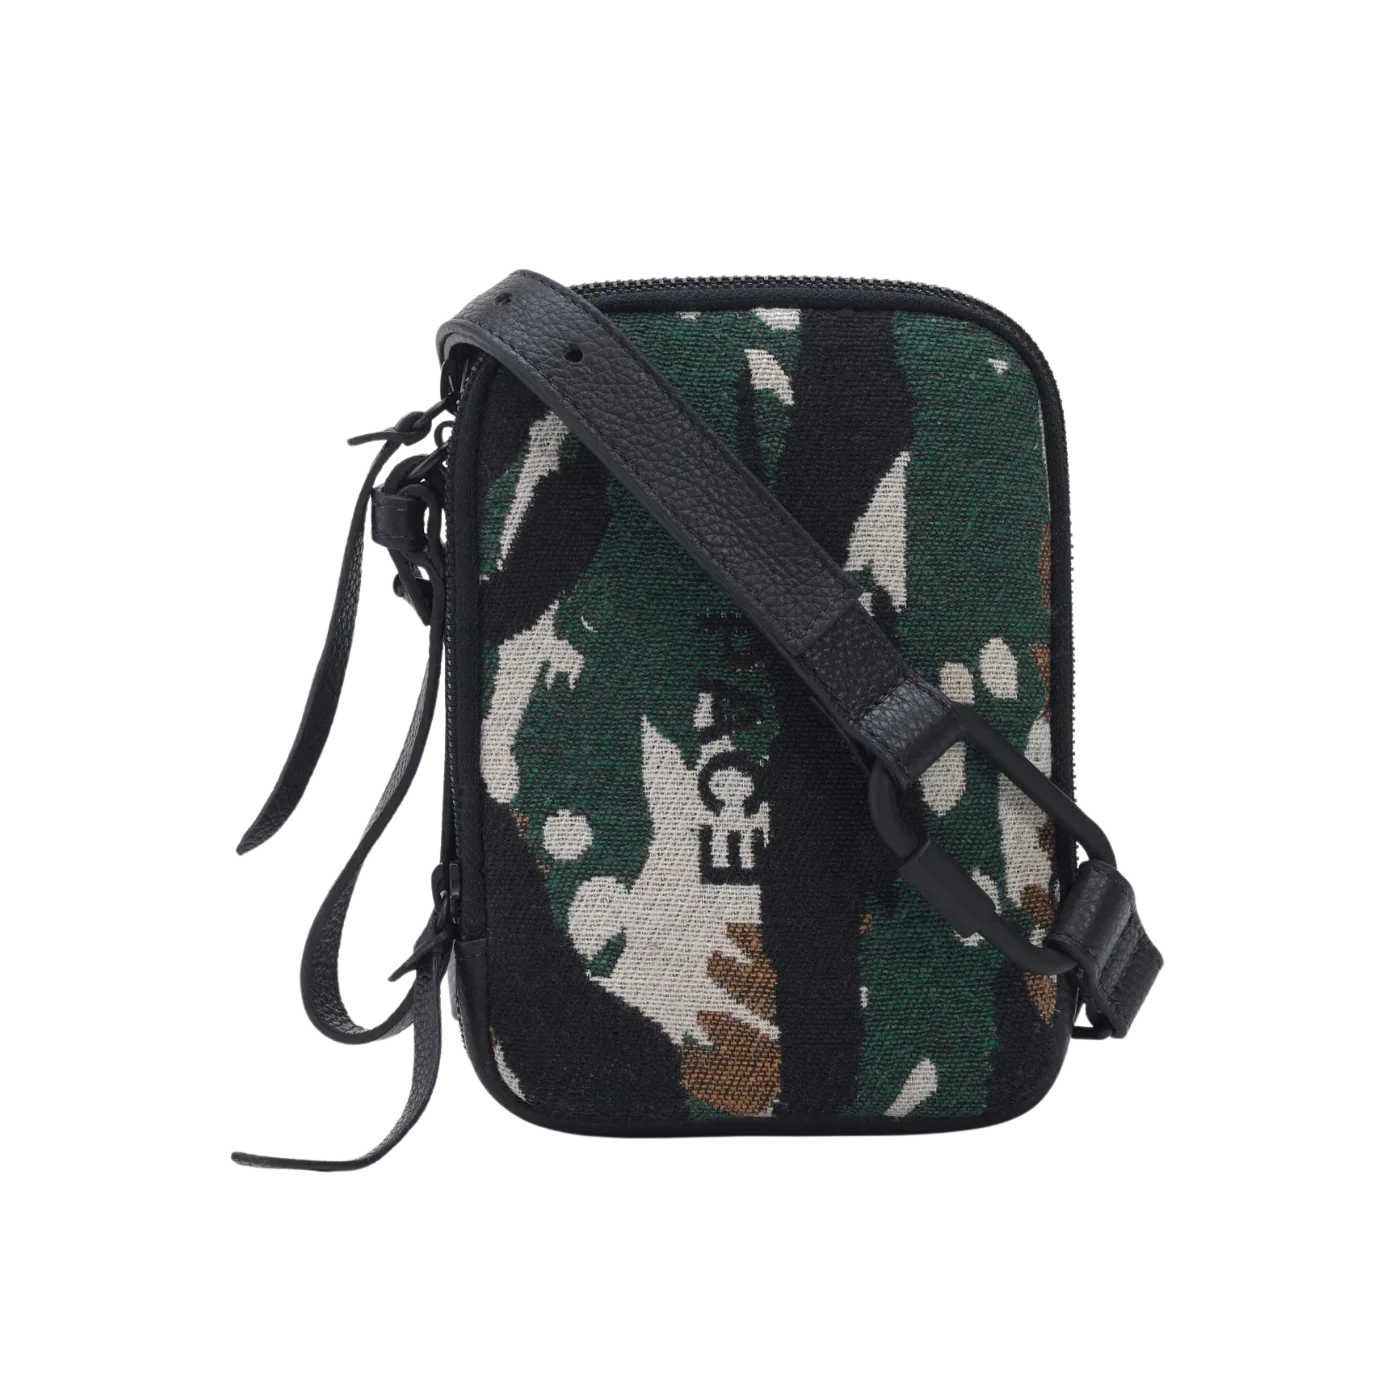 PACE - Trunk Bag v2 "Tiger Camo" - THE GAME